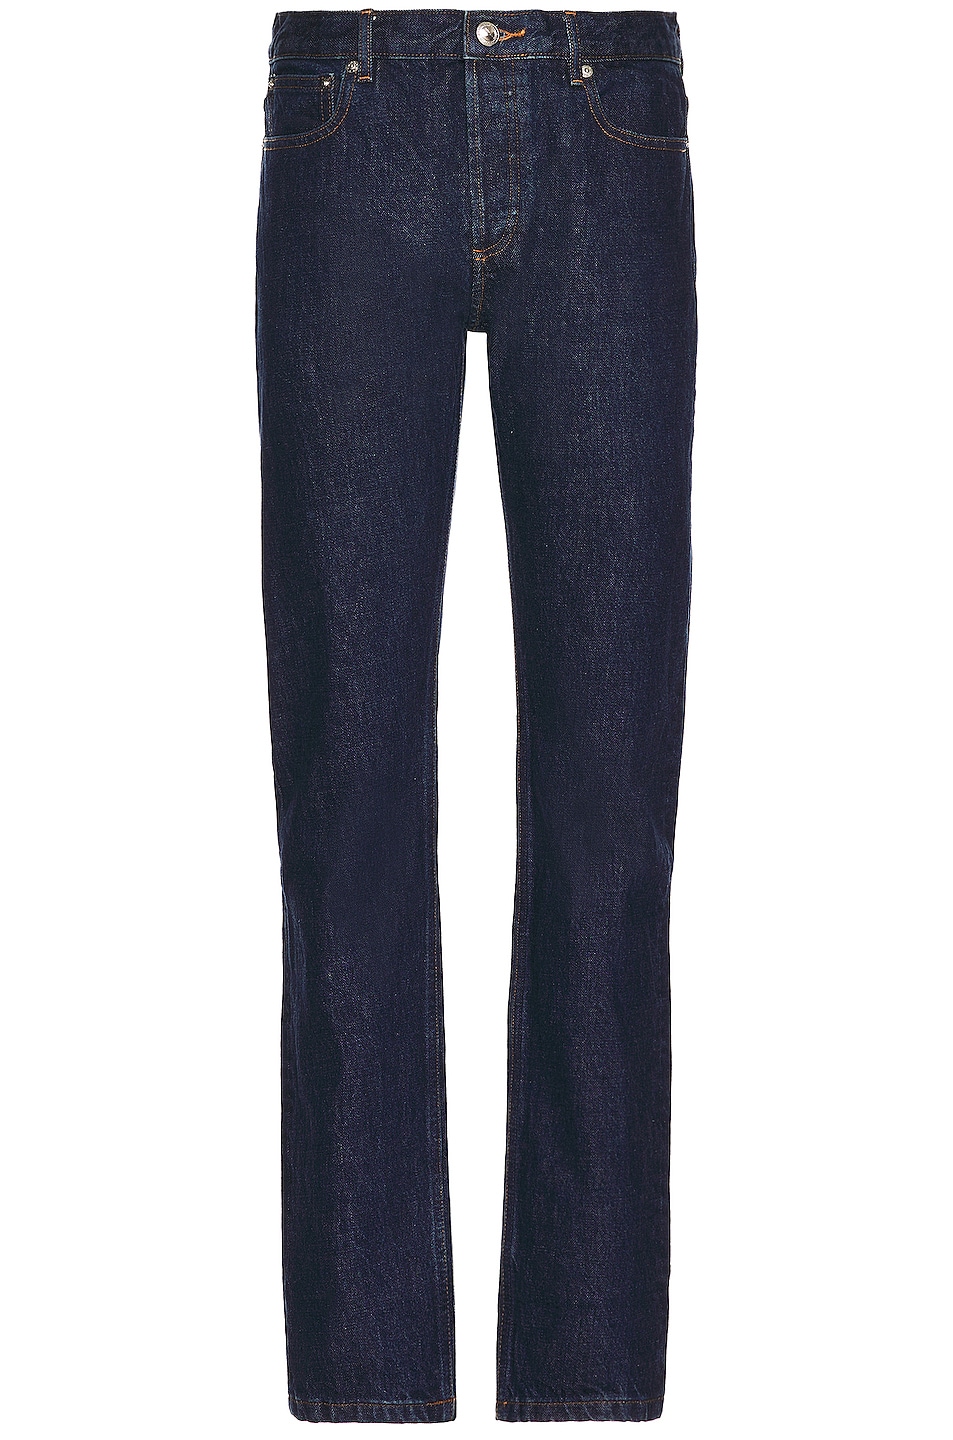 Image 1 of A.P.C. Petit New Standard in Washed Indigo